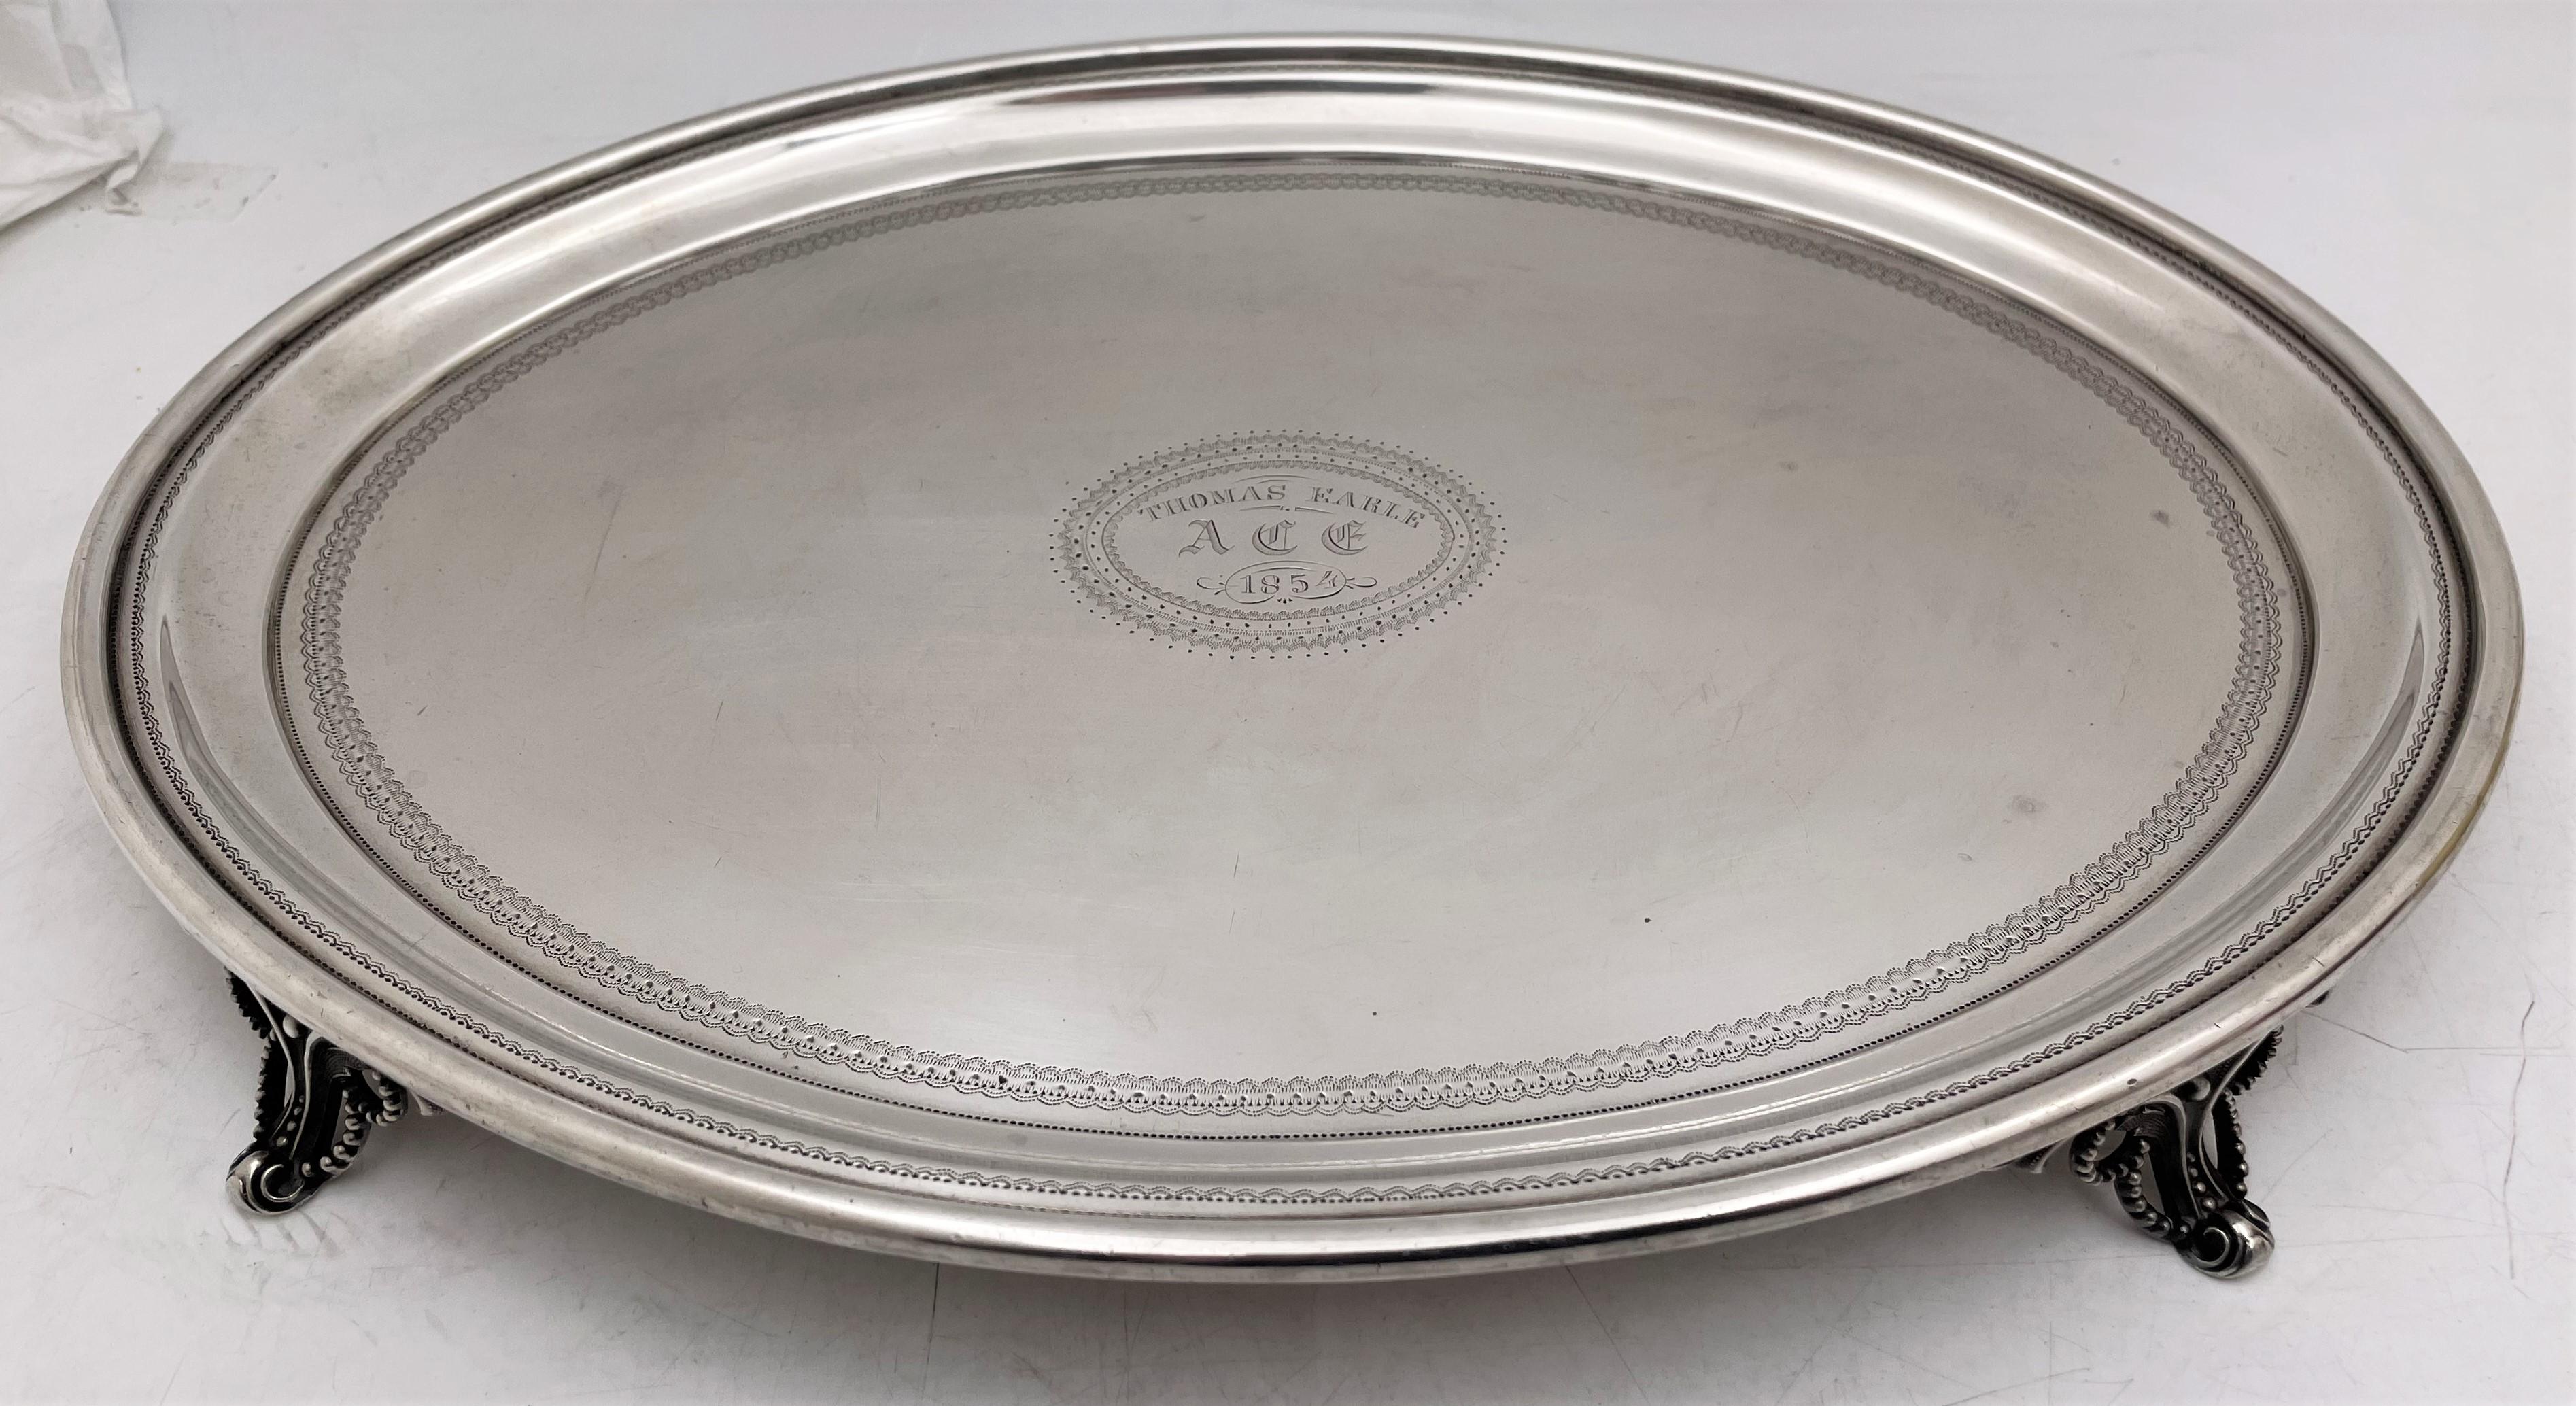 Bailey & Co., sterling silver salver or dish standing on 4 legs, from the early 1850s, with delicate, engraved motifs adorning the dish. It measures 14'' in length by 10 1/2'' in width by 1 1/8'' in height, weighs 29.9 troy ounces, and bears